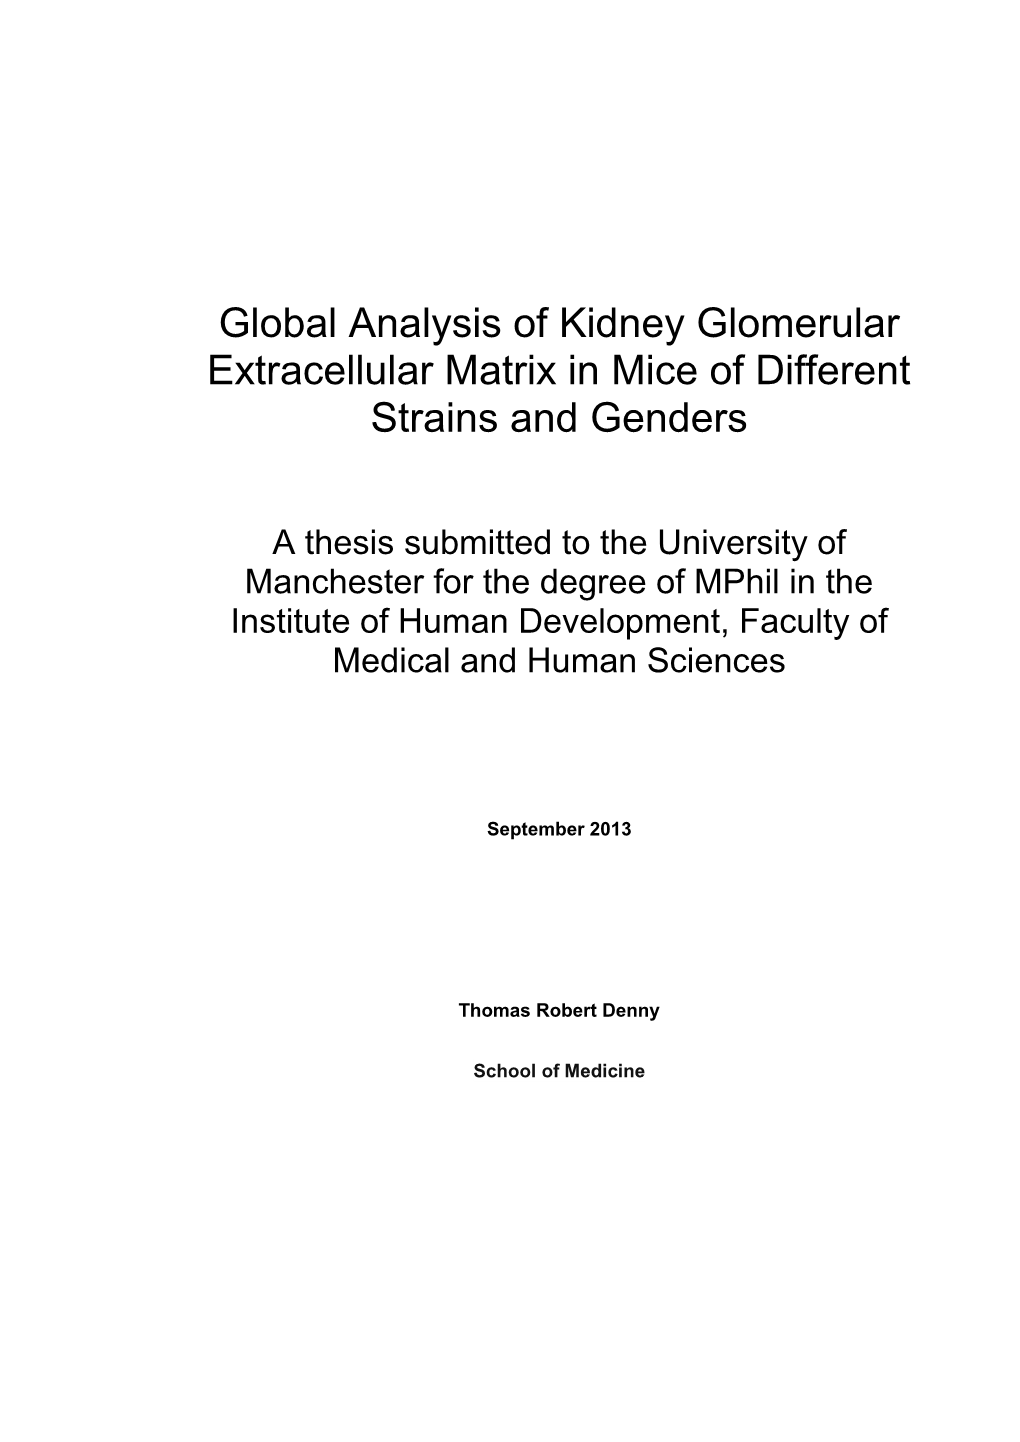 Global Analysis of Kidney Glomerular Extracellular Matrix in Mice of Different Strains and Genders